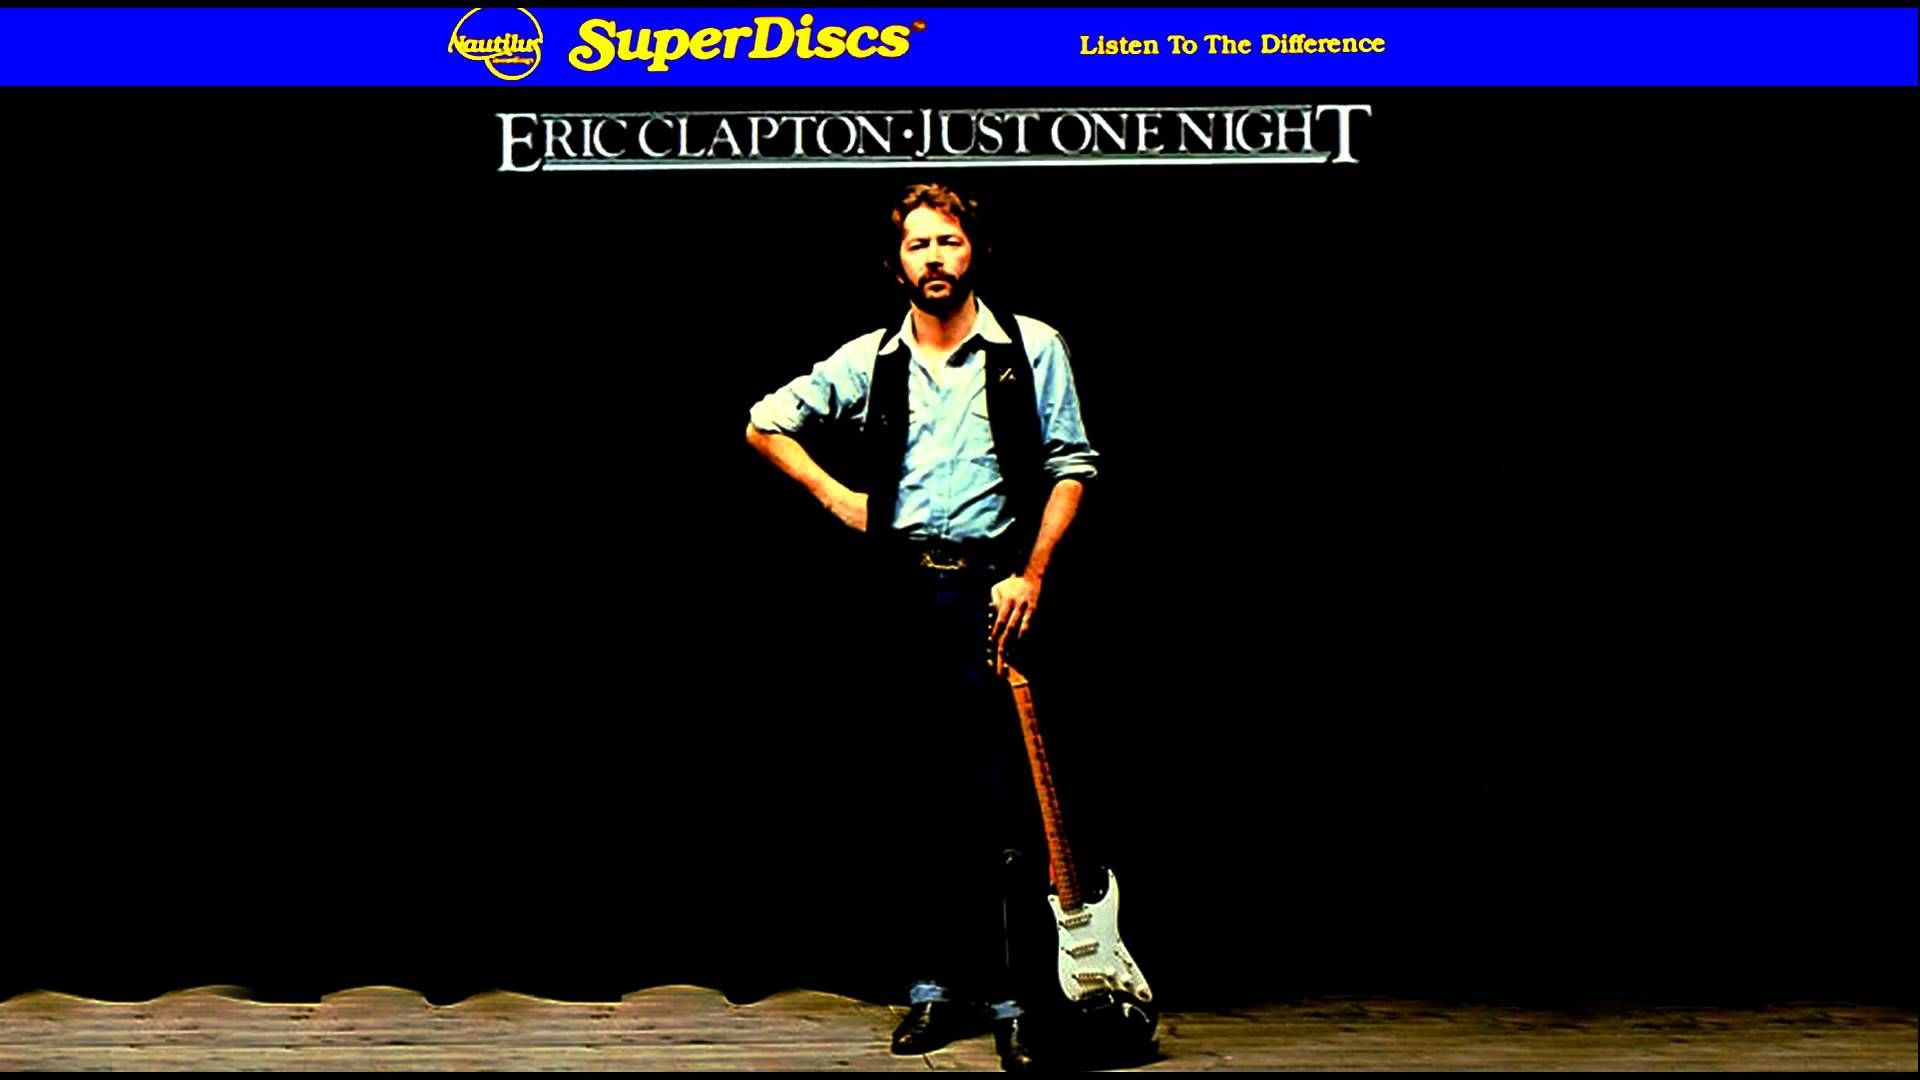 Eric Clapton Just One Night - HD Wallpaper 